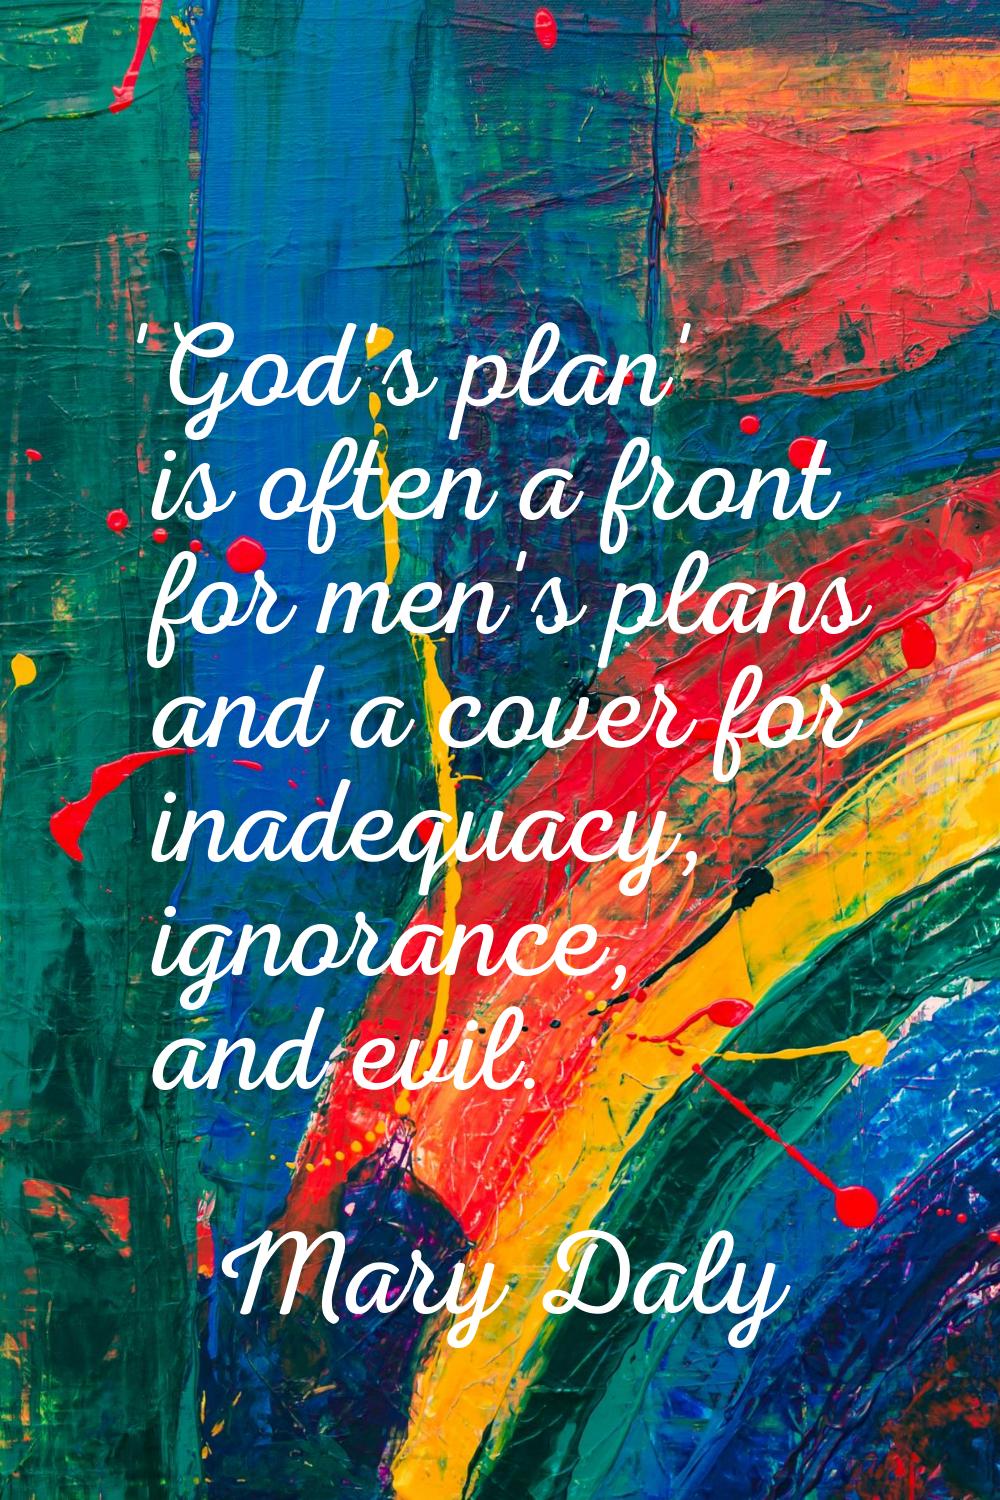 'God's plan' is often a front for men's plans and a cover for inadequacy, ignorance, and evil.